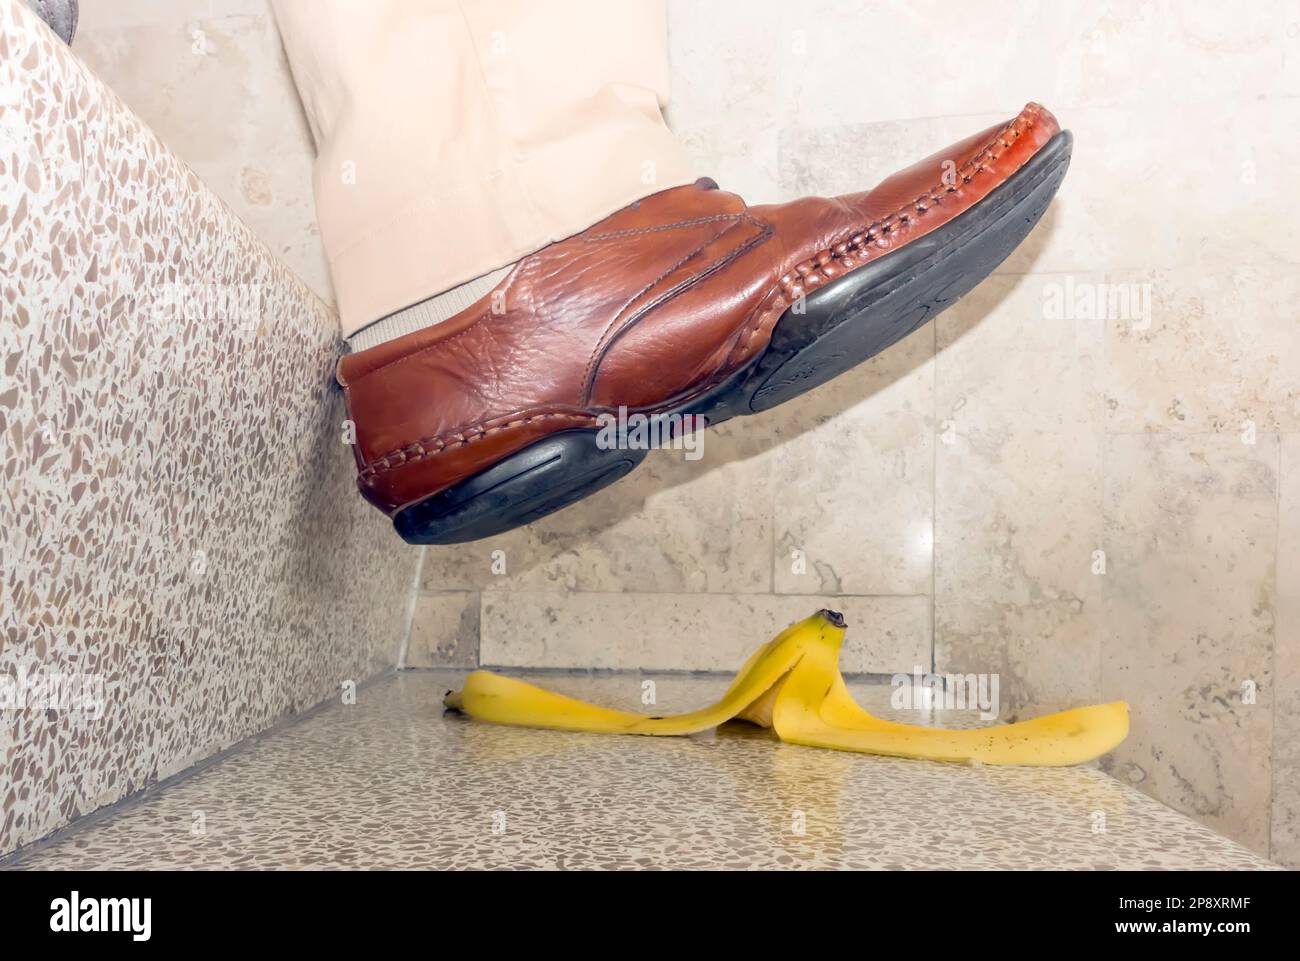 Foot about to step on banana skin on stairs Stock Photo